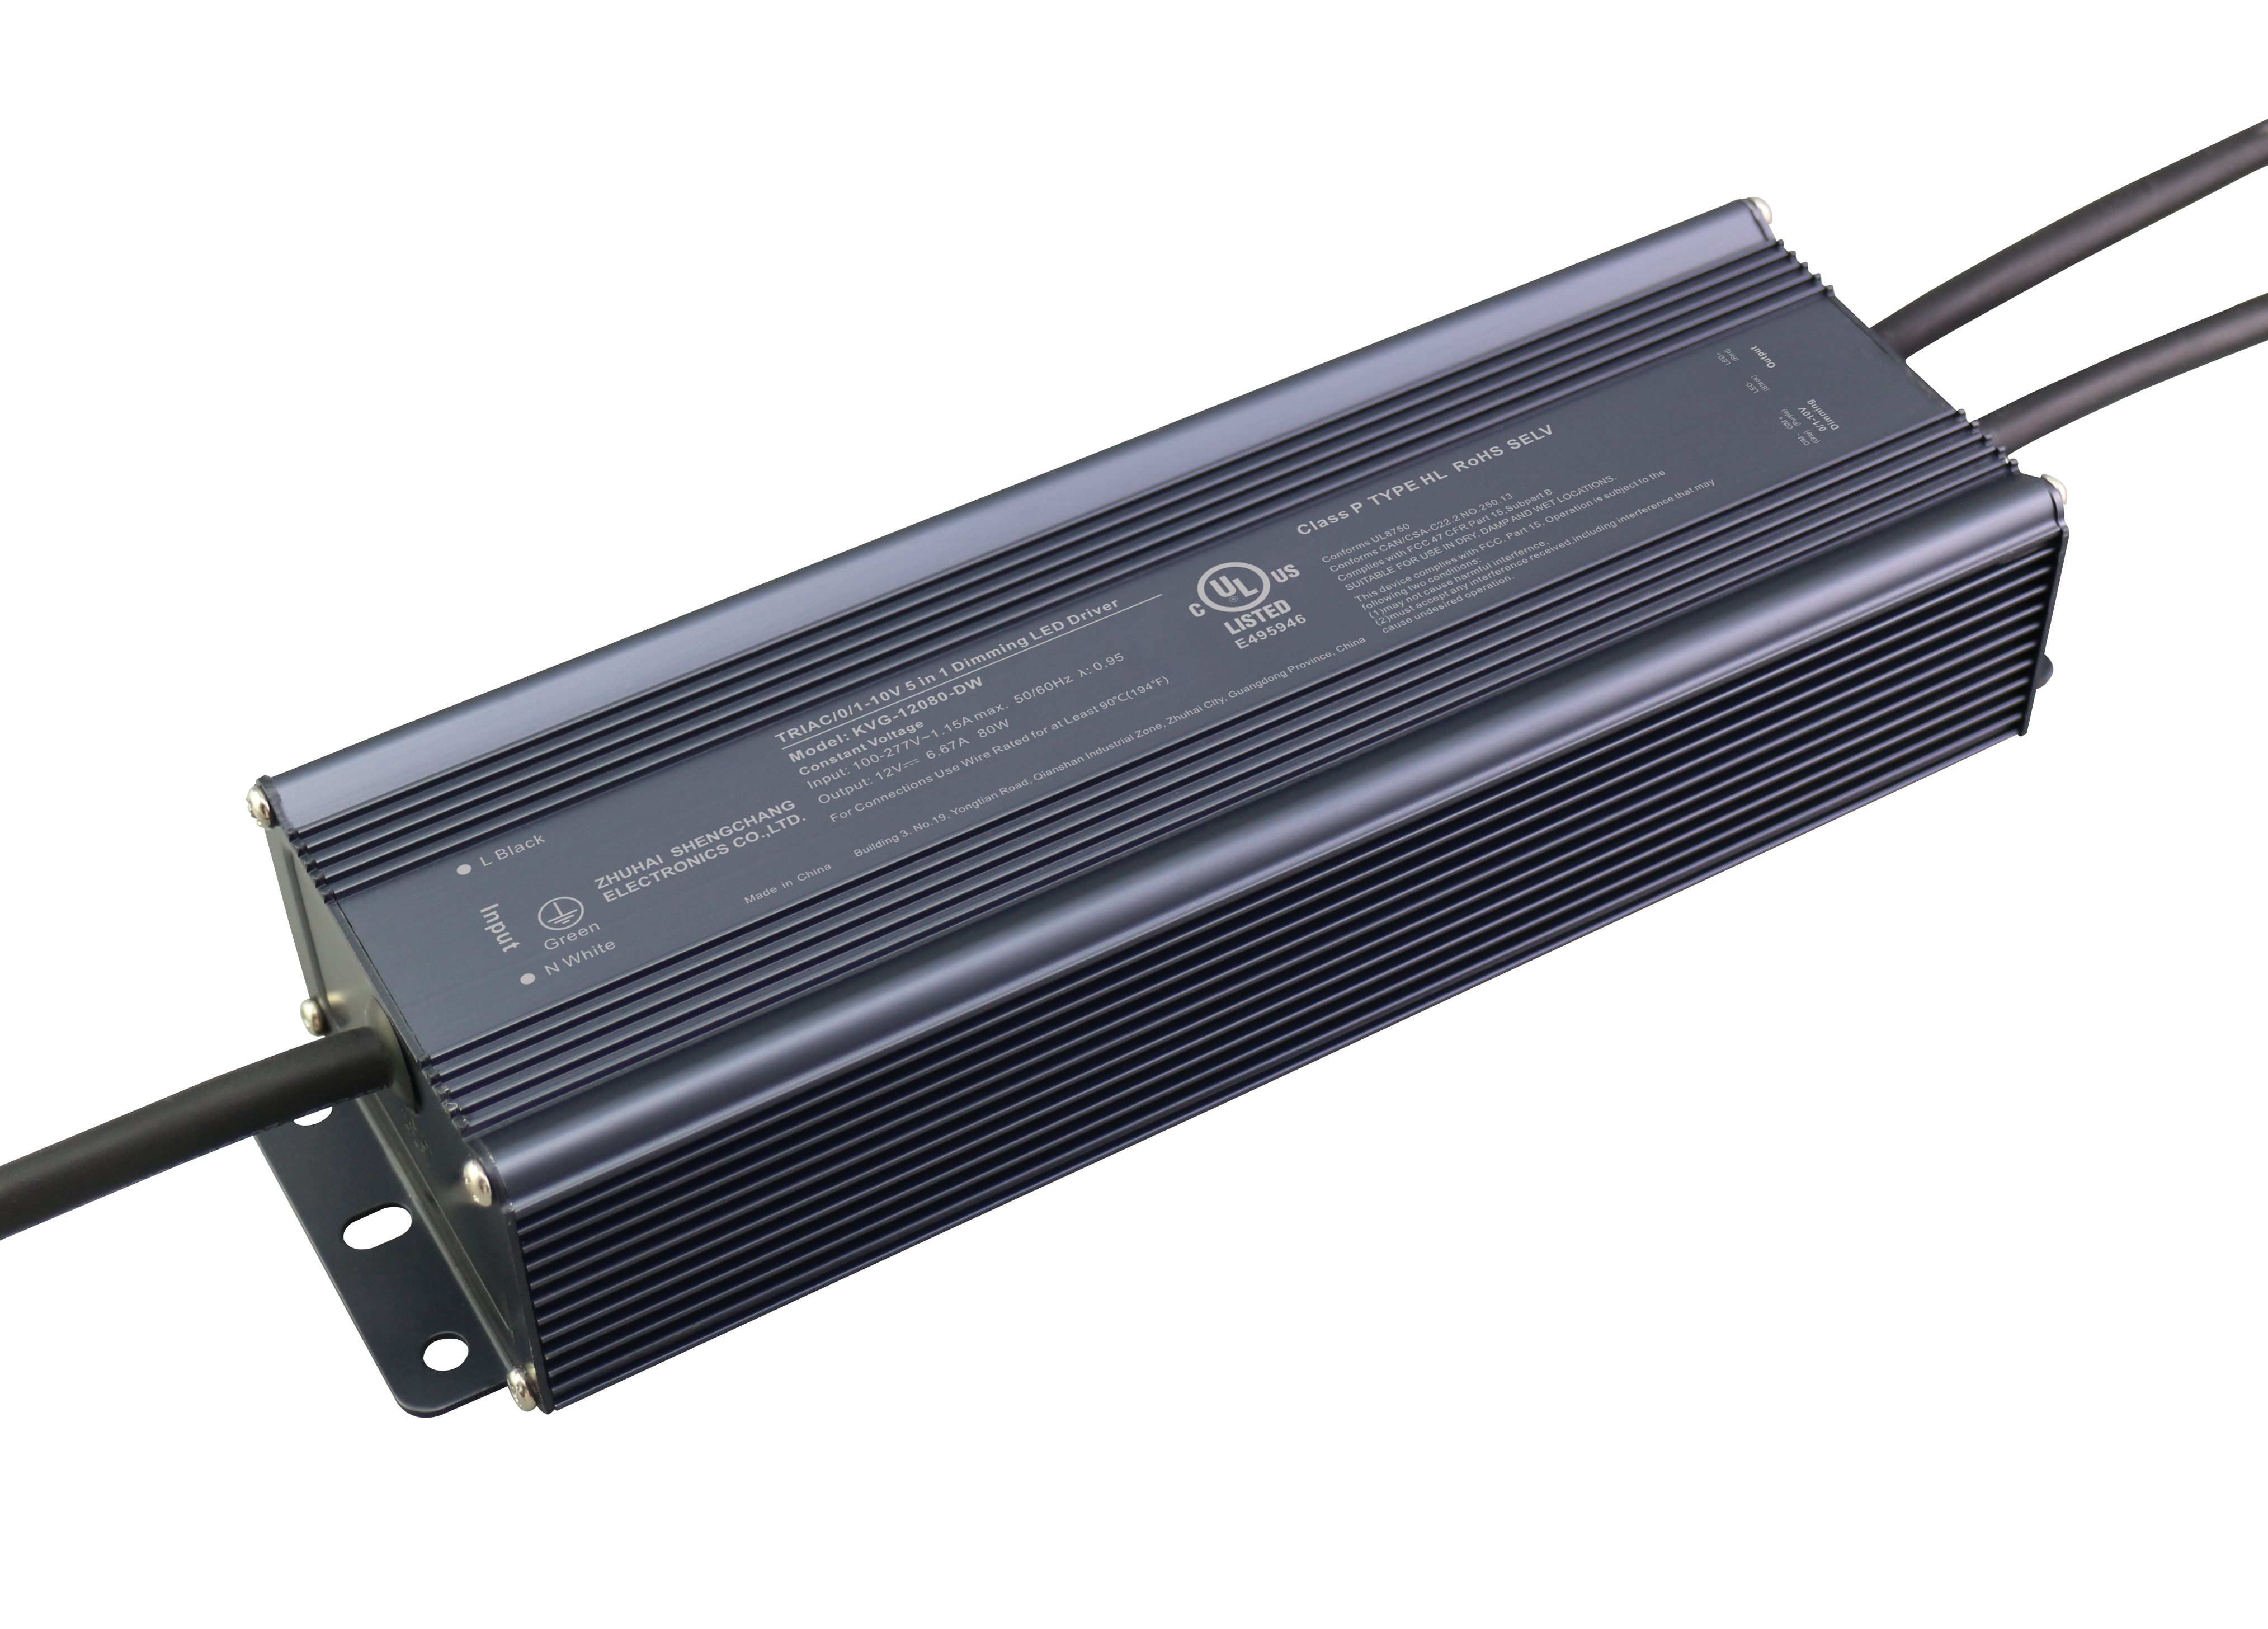 KVG-DW Series 96W Constant Voltage Triac&0/1-10V Dimmable LED driver